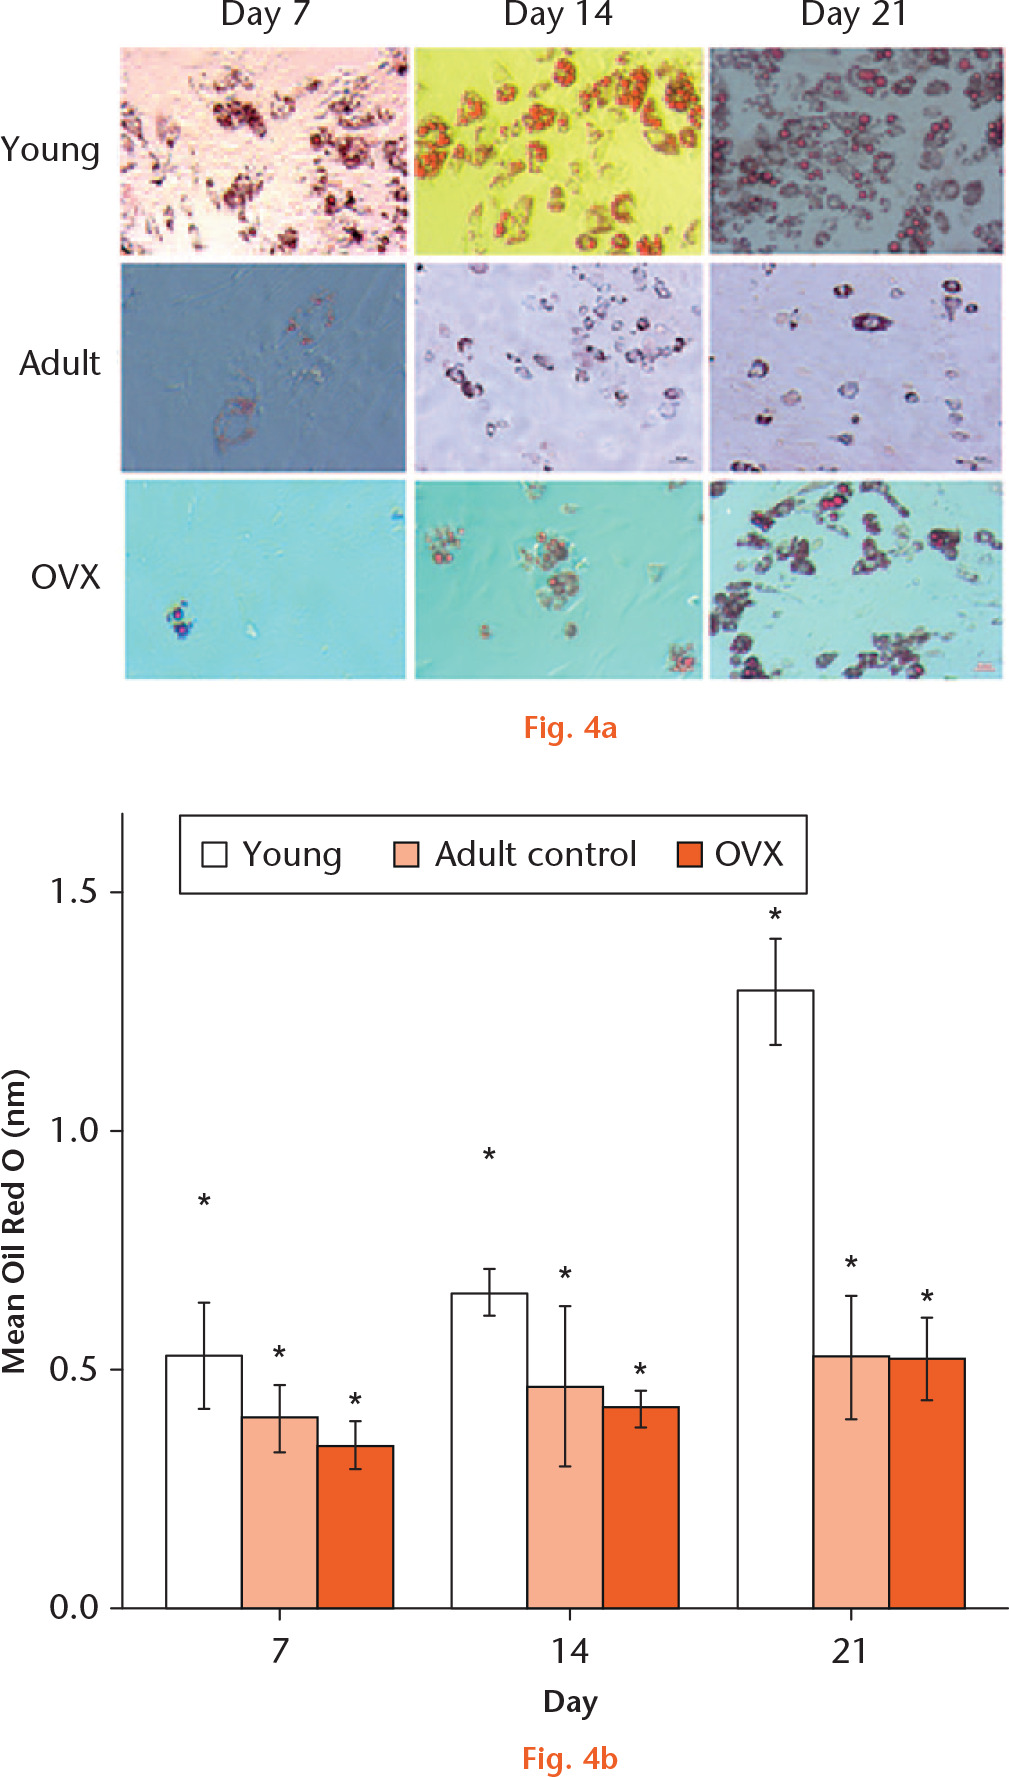  
            a) Oil Red O staining to show adipogenic differentiation of young, adult, and ovariectomized (OVX) mesenchymal stem cells (MSCs) at day seven, 14, and 21. b) Graph showing the mean Oil Red O production when MSCs from young, adult control, and OVX rats (n = 3) differentiated to adipocytes at days seven, 14, and 21. *Significant difference of p < 0.05 using a two-tailed Student’s t-test.
          